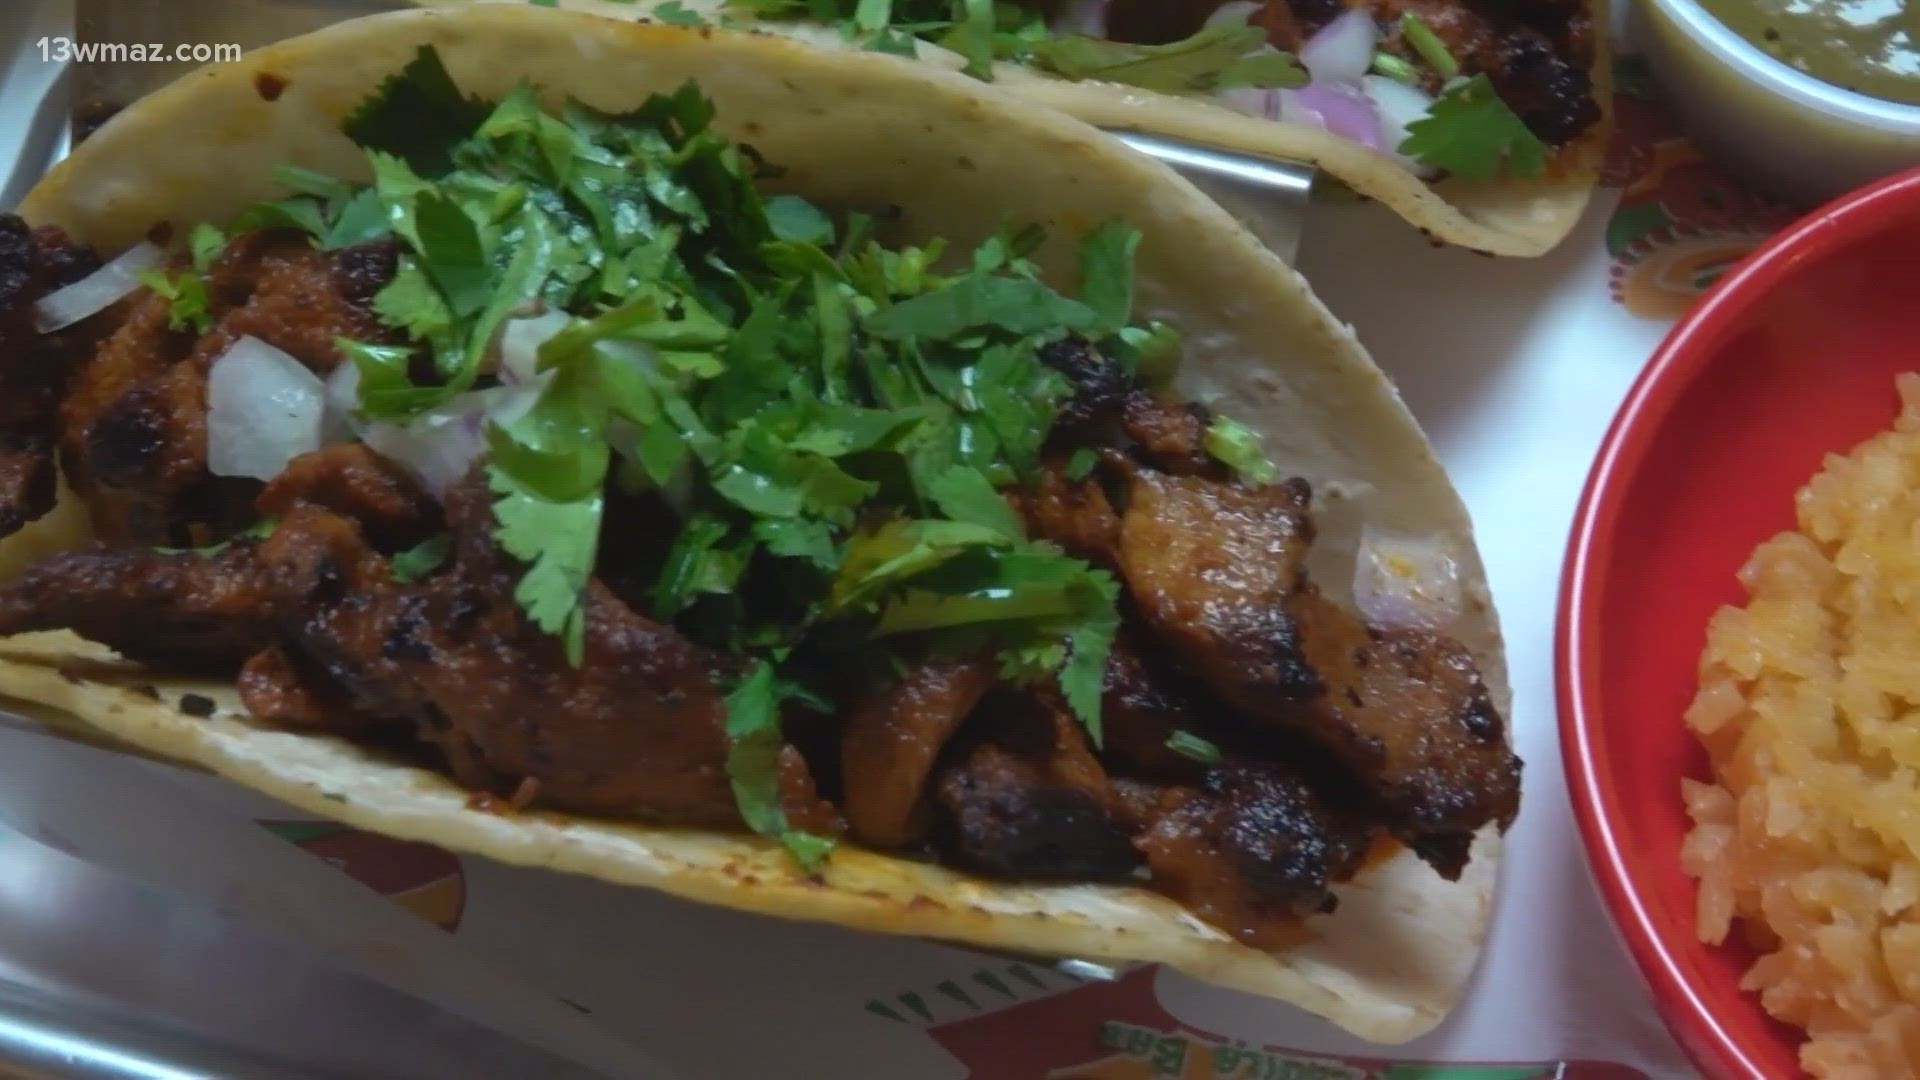 The restaurant offers a variety of Mexican food and drinks, and their Al pastor tacos are sure to make your mouth water.